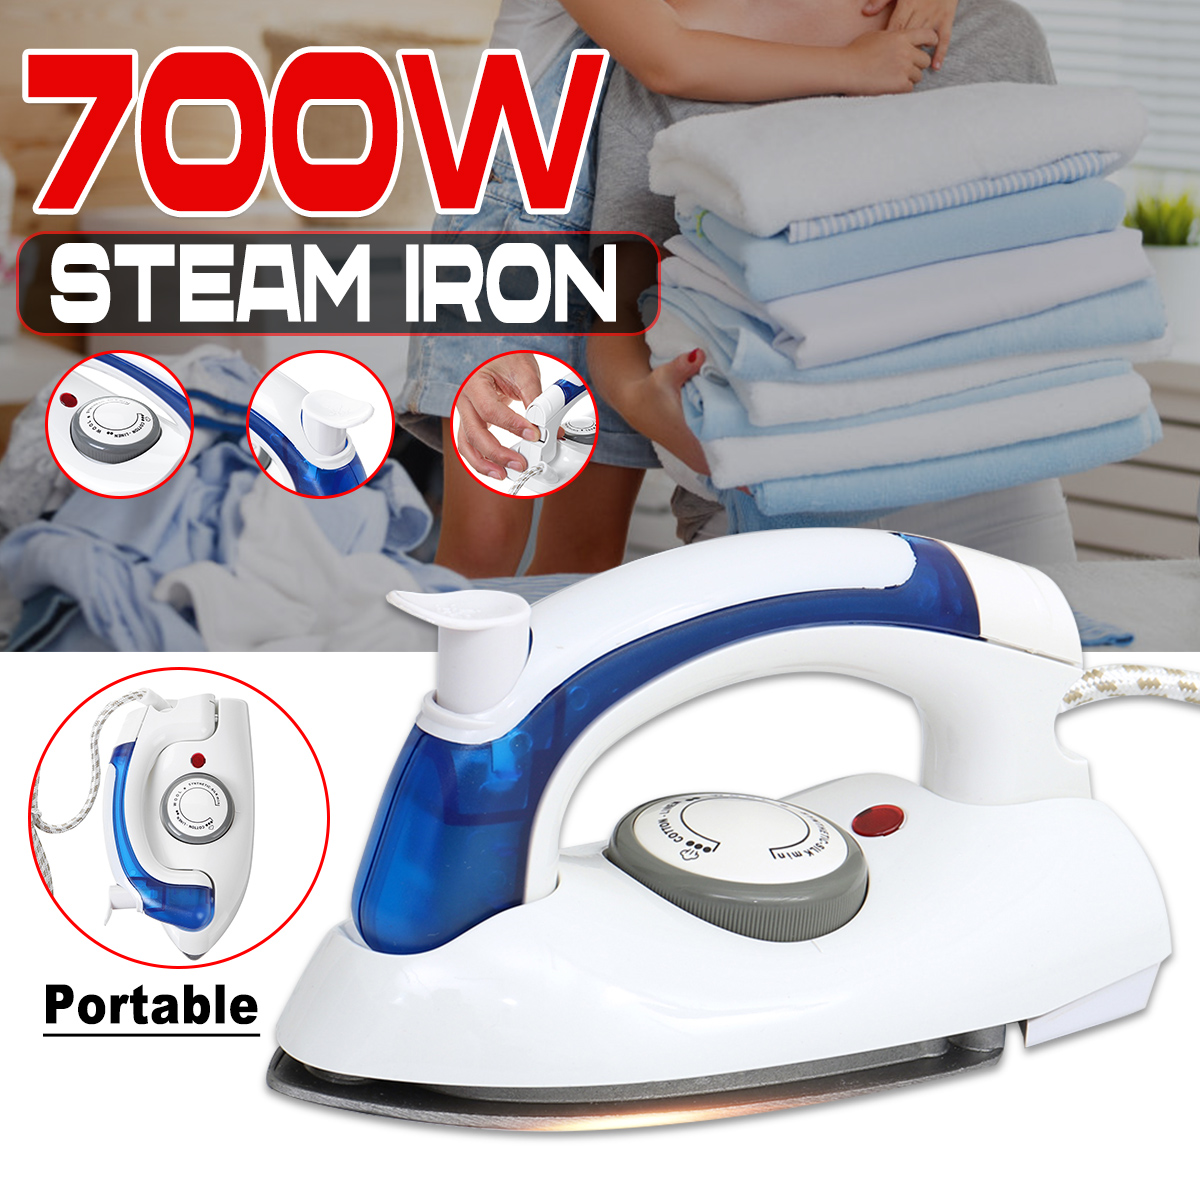 700W-Portable-Handheld-Foldable-Electric-Steam-Iron-3-Gear-Fast-Heat-Up-Garment-Steamer-Wrinkle-Remo-1754049-3